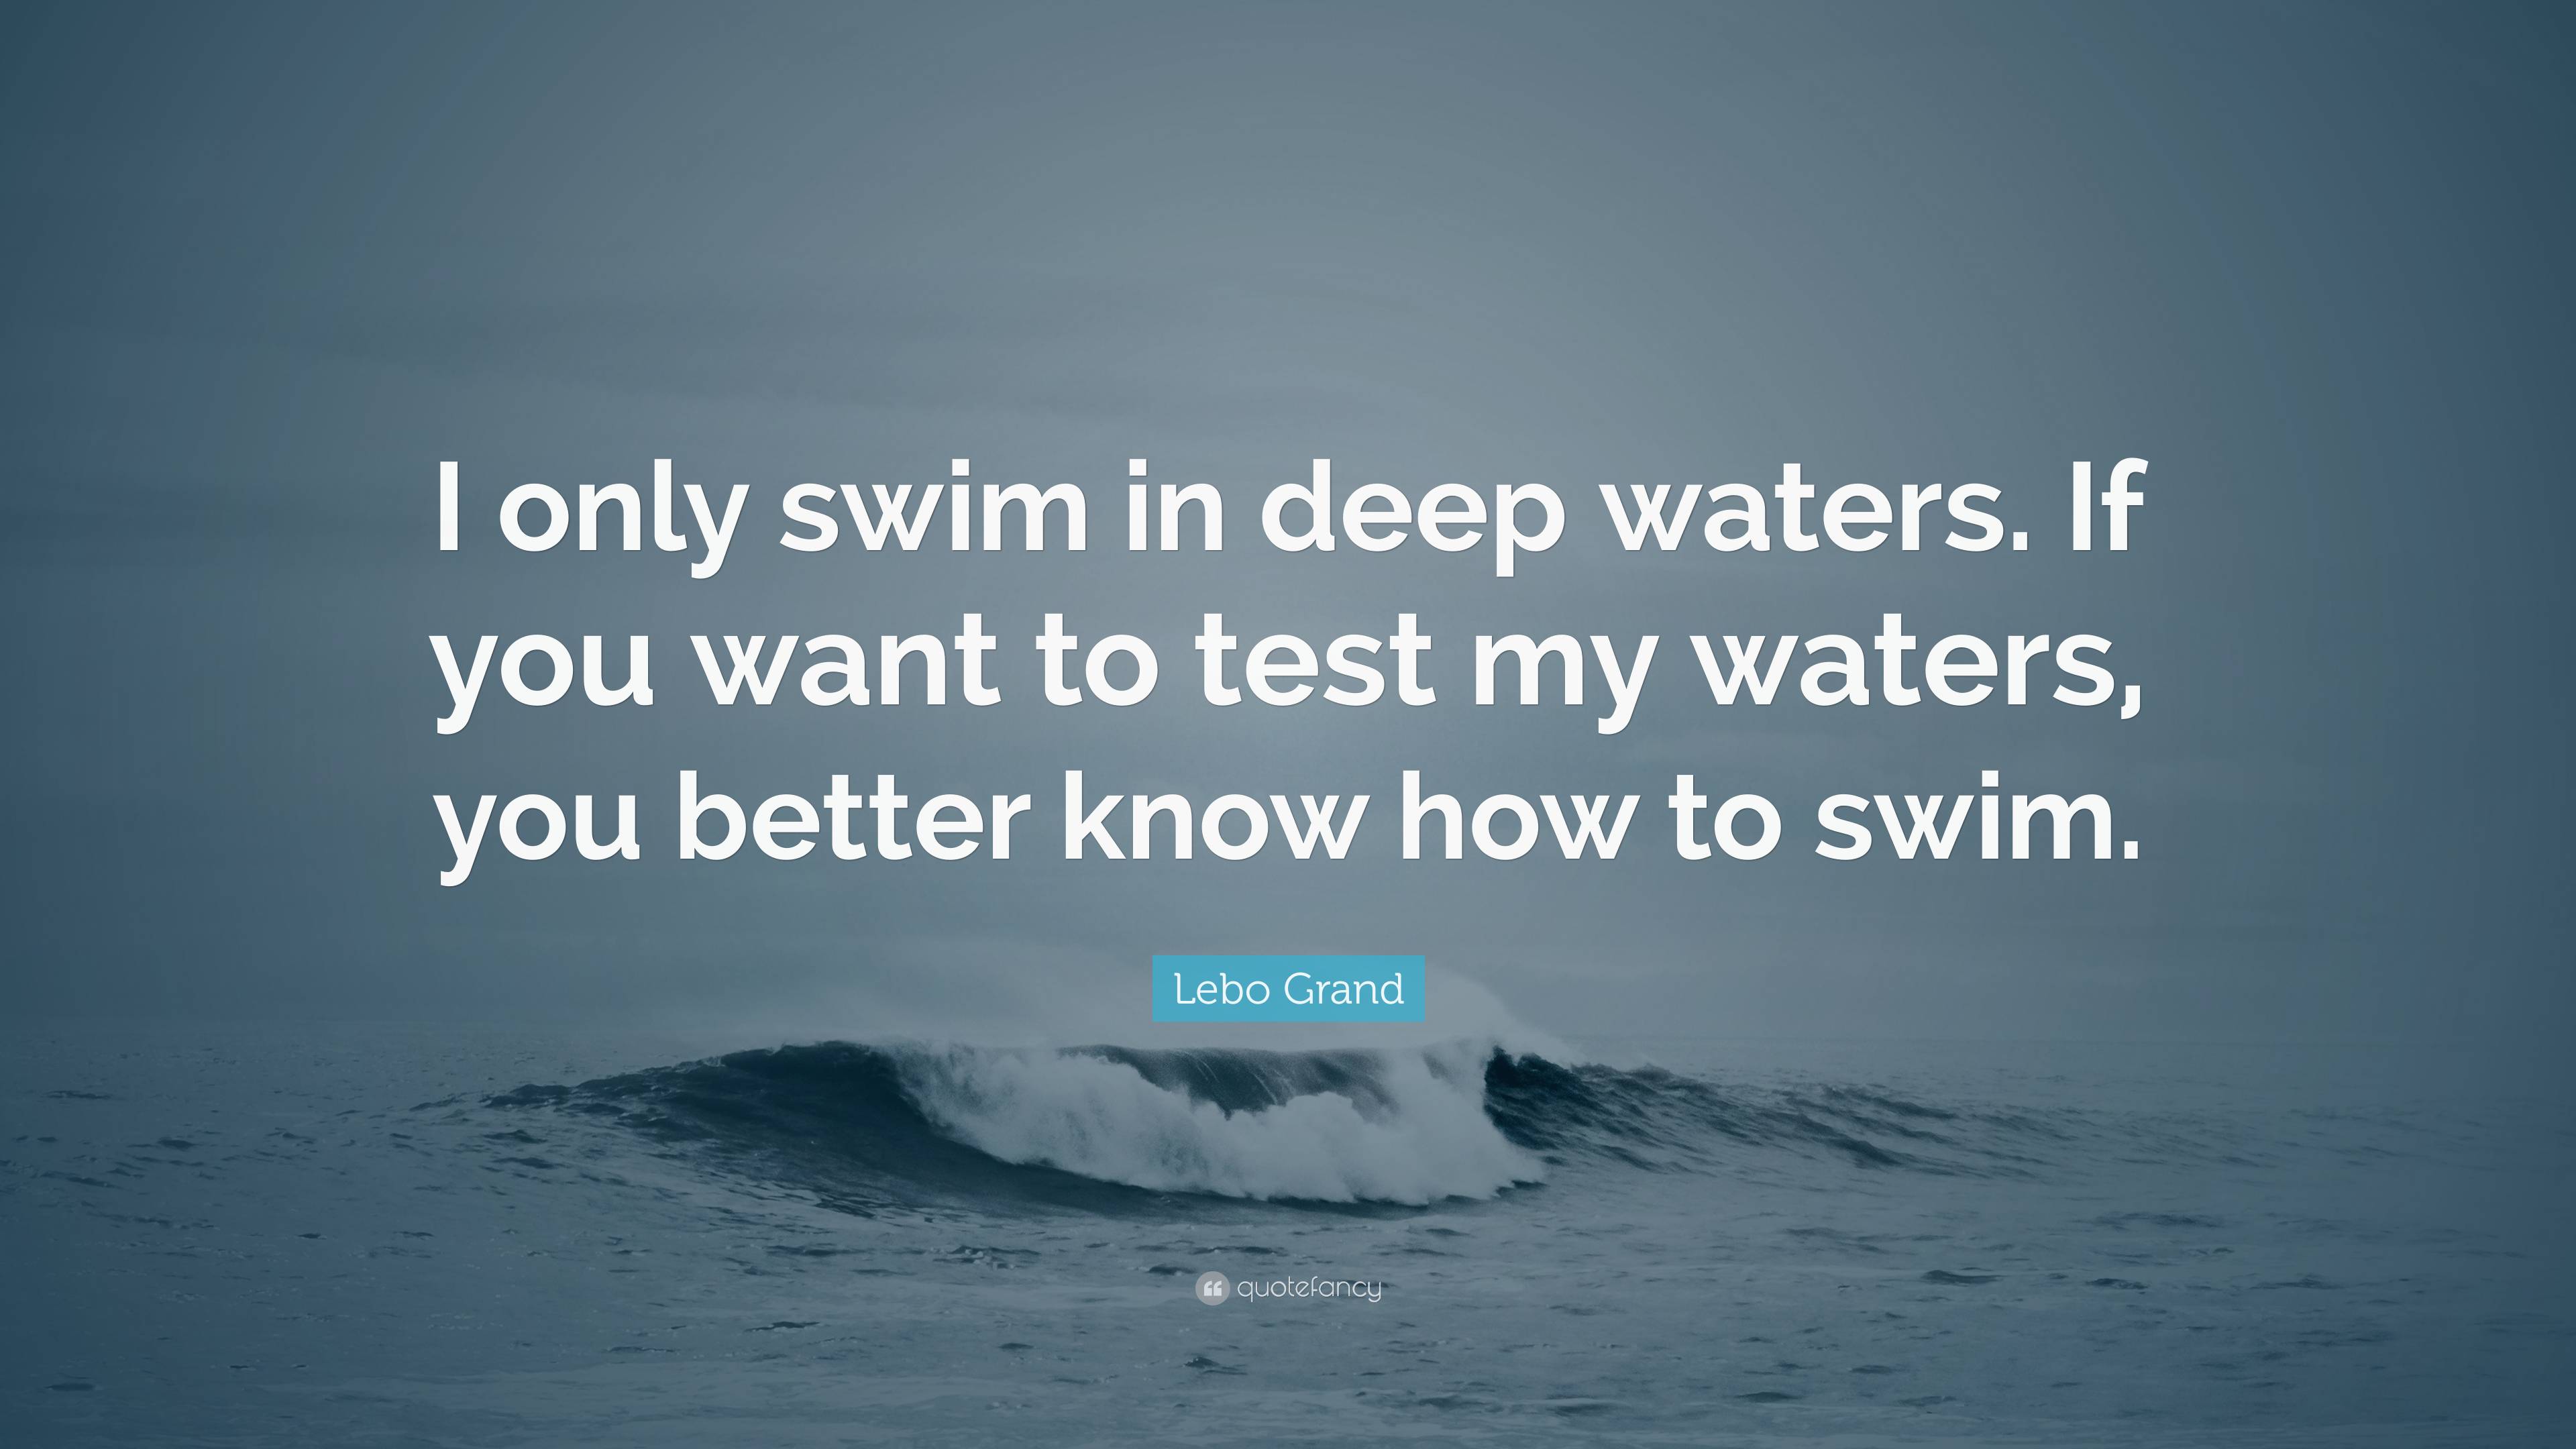 Lebo Grand Quote: “I only swim in deep waters. If you want to test